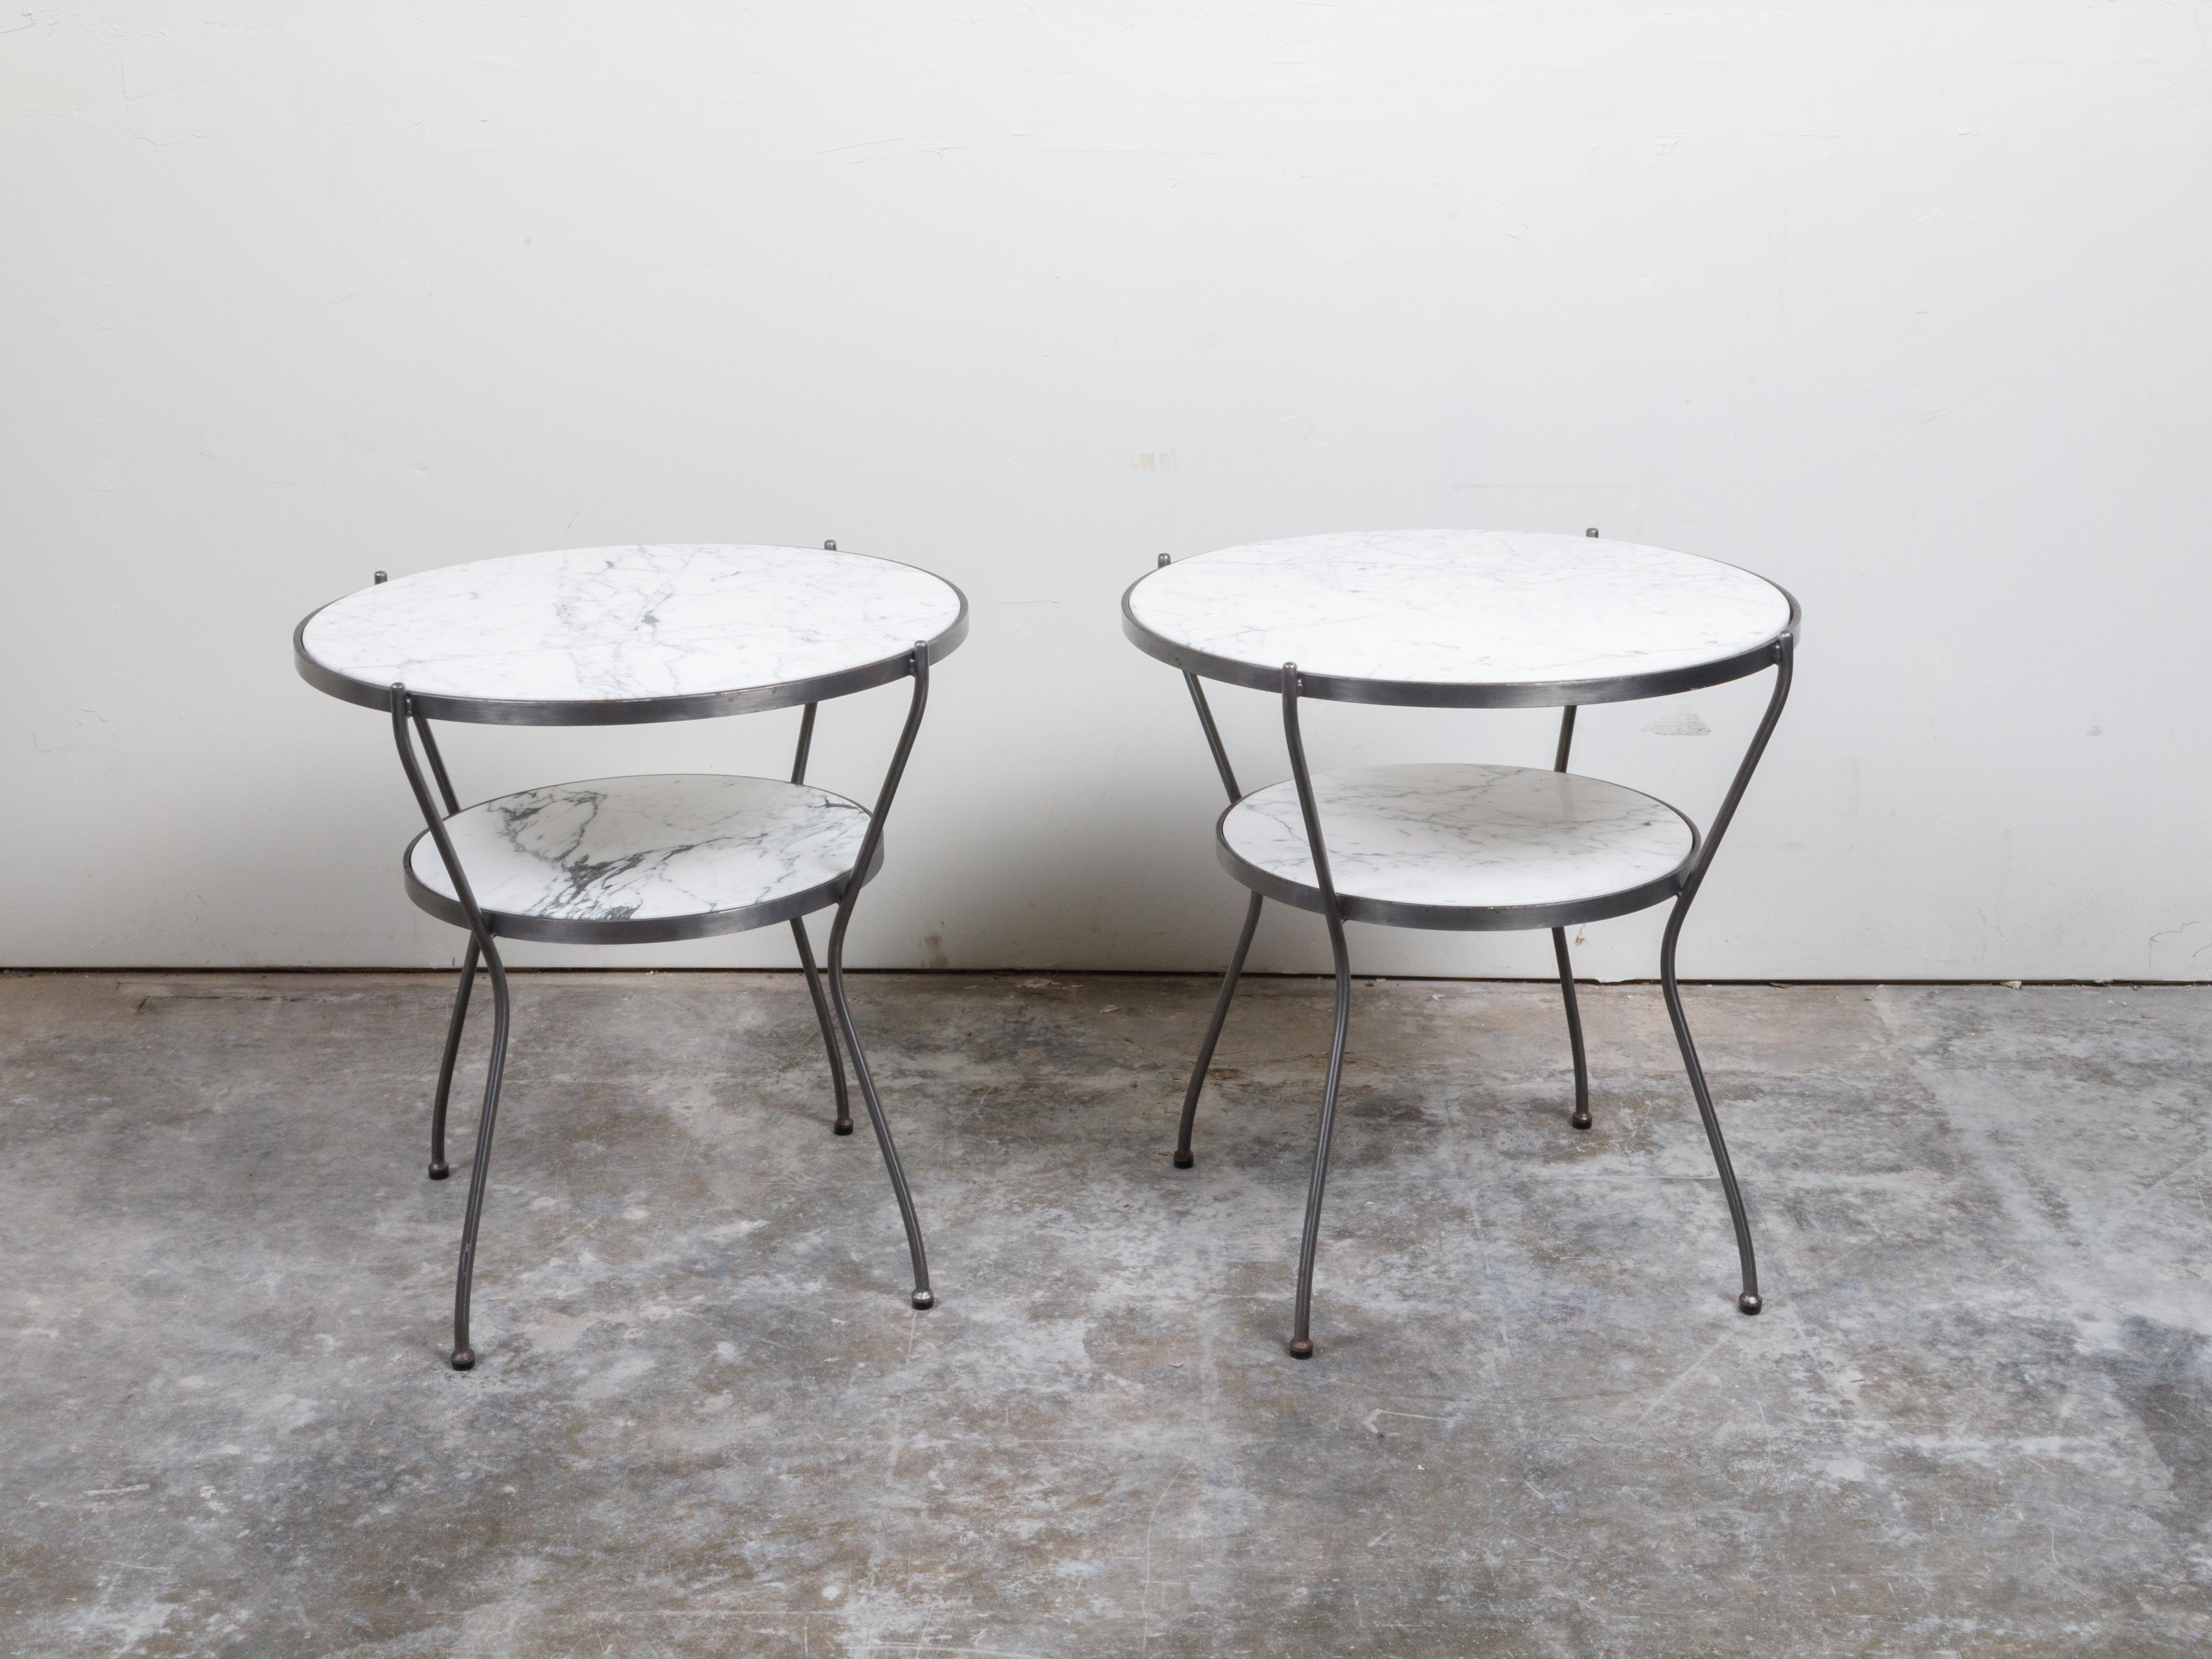 Pair of Italian Midcentury Steel Side Tables with Marble Tops and Shelves For Sale 4